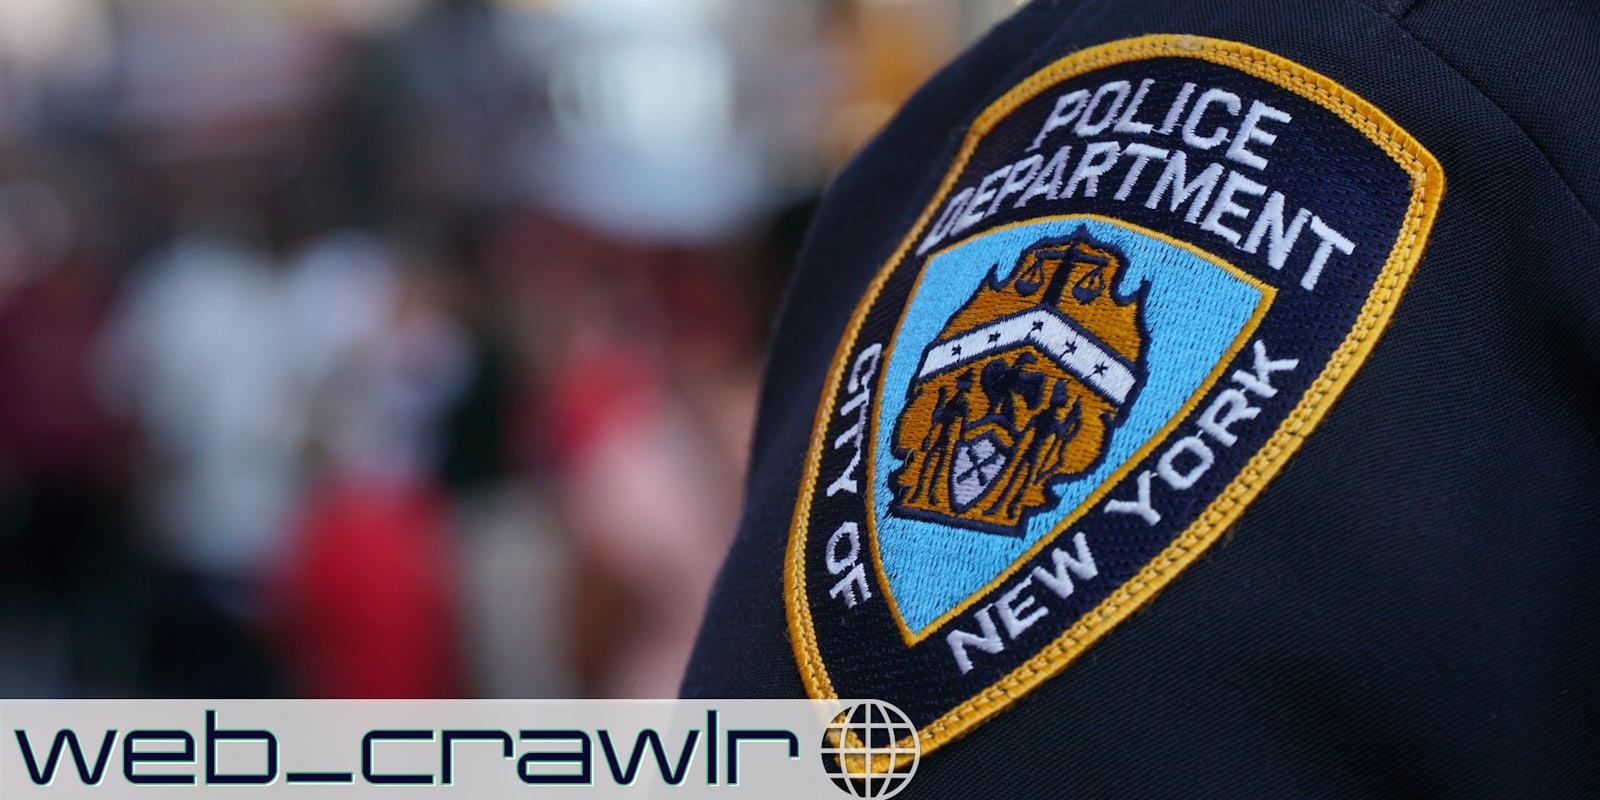 A NYPD patch. The Daily Dot newsletter web_crawlr logo is in the bottom left corner.